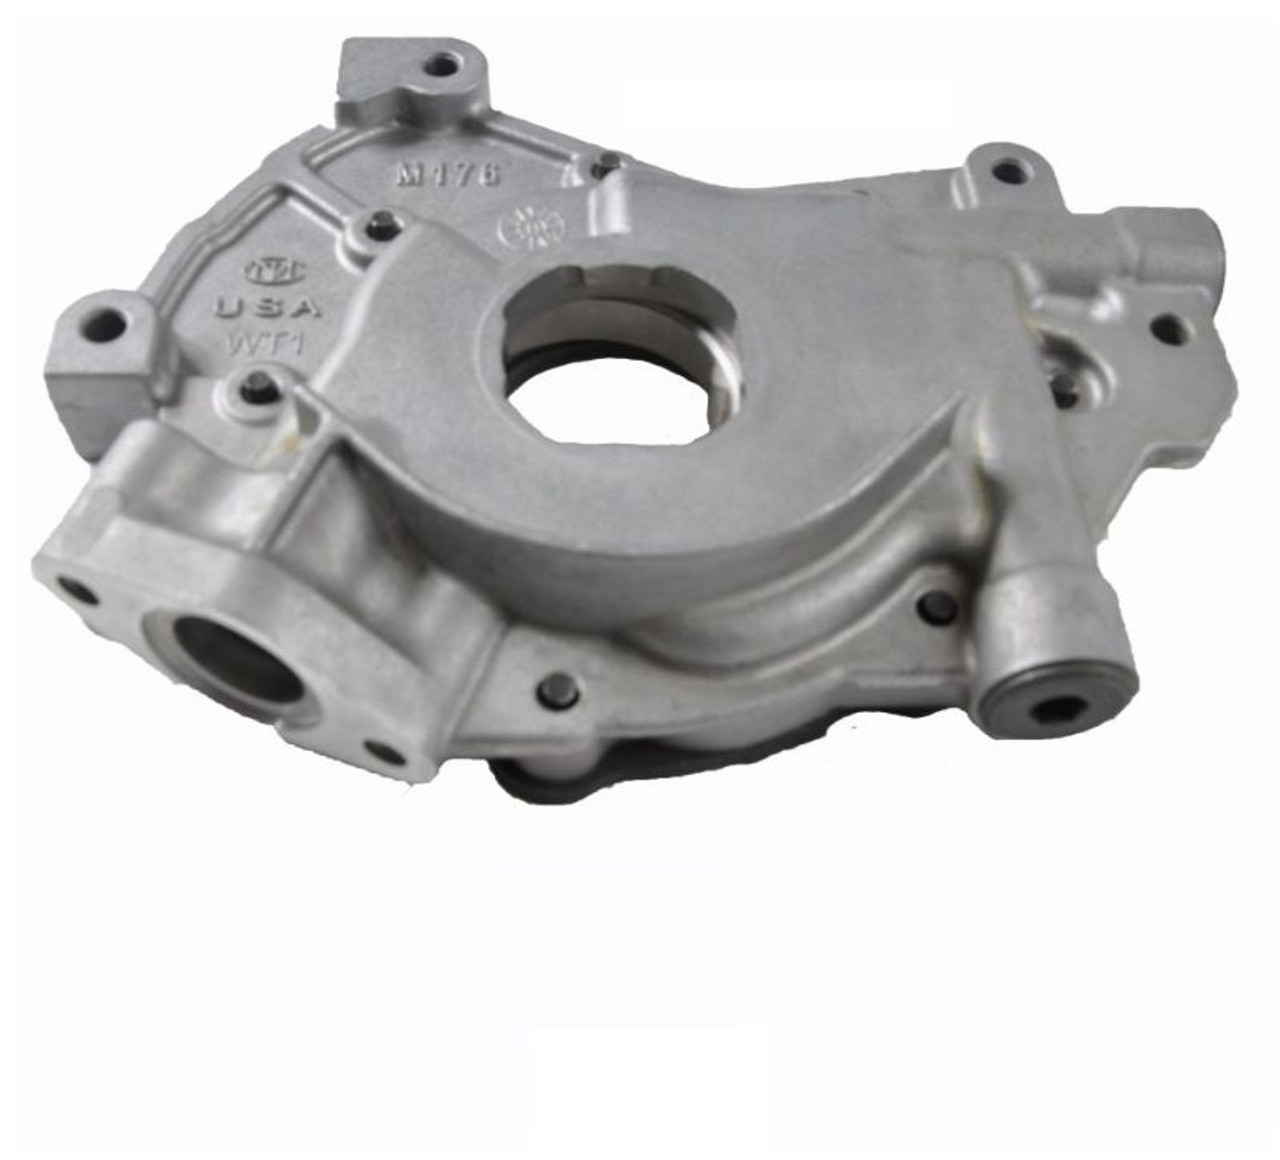 Oil Pump - 1999 Ford Mustang 4.6L (EP176.K104)